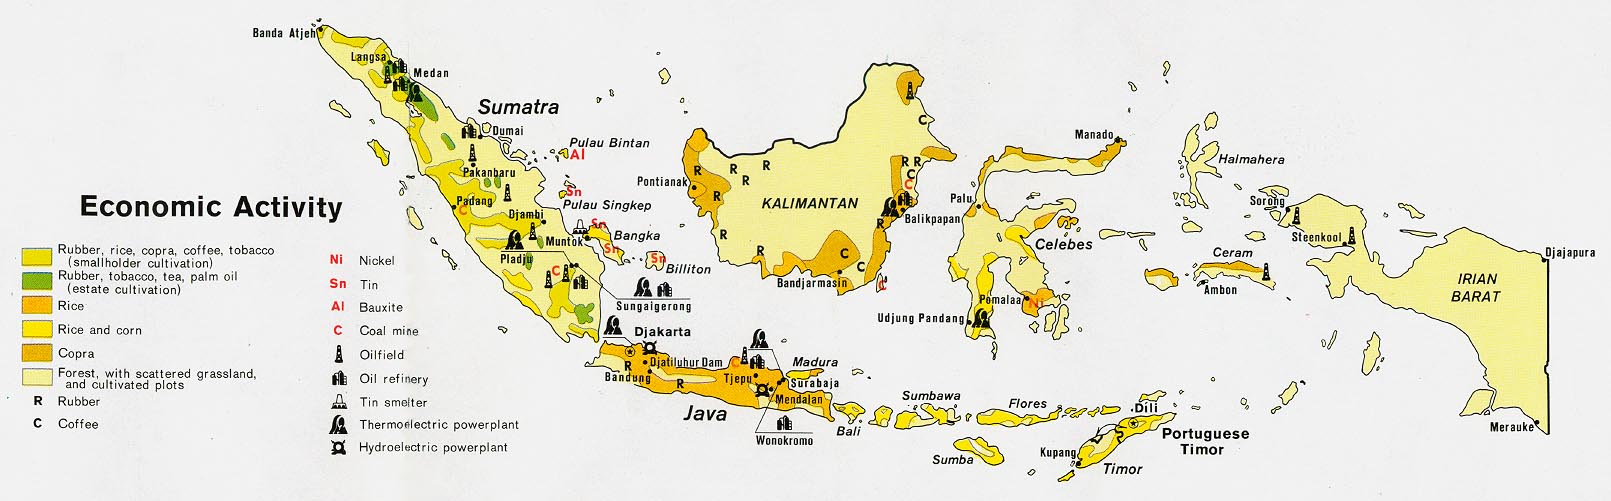 Download Free Indonesia Maps 